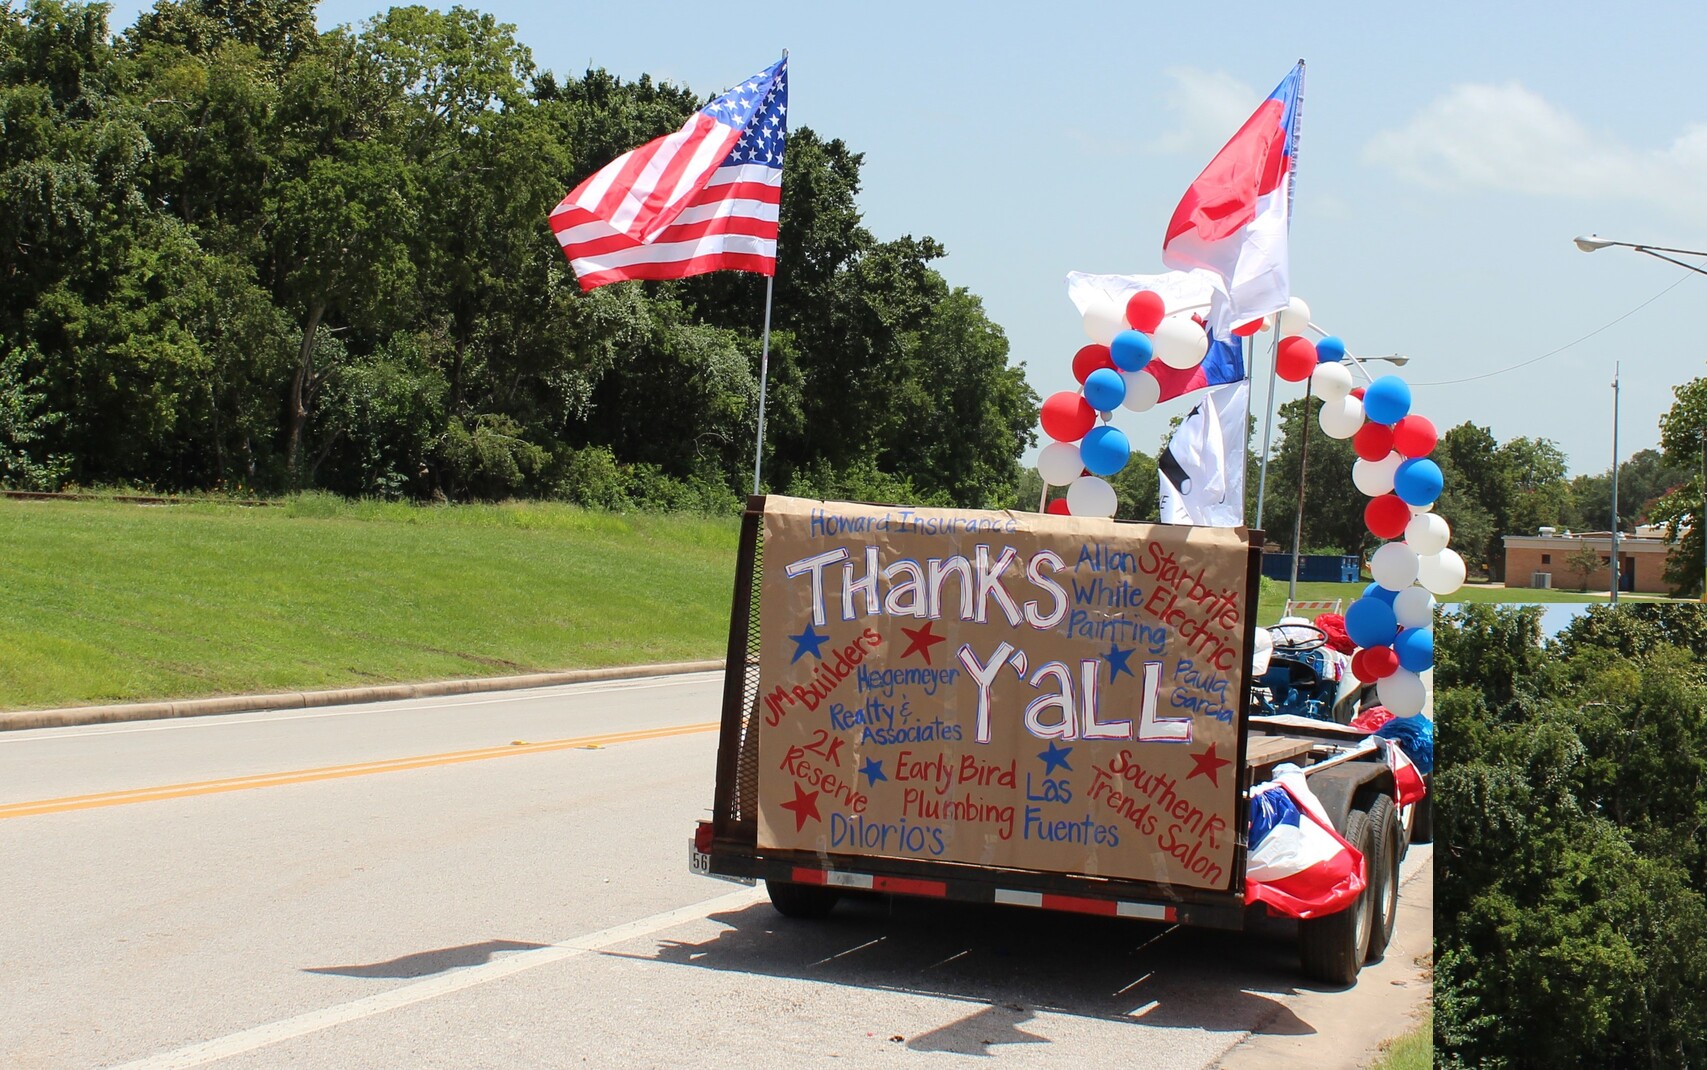 A parade float decorated with names of companies who provided local marketing support in Hempstead